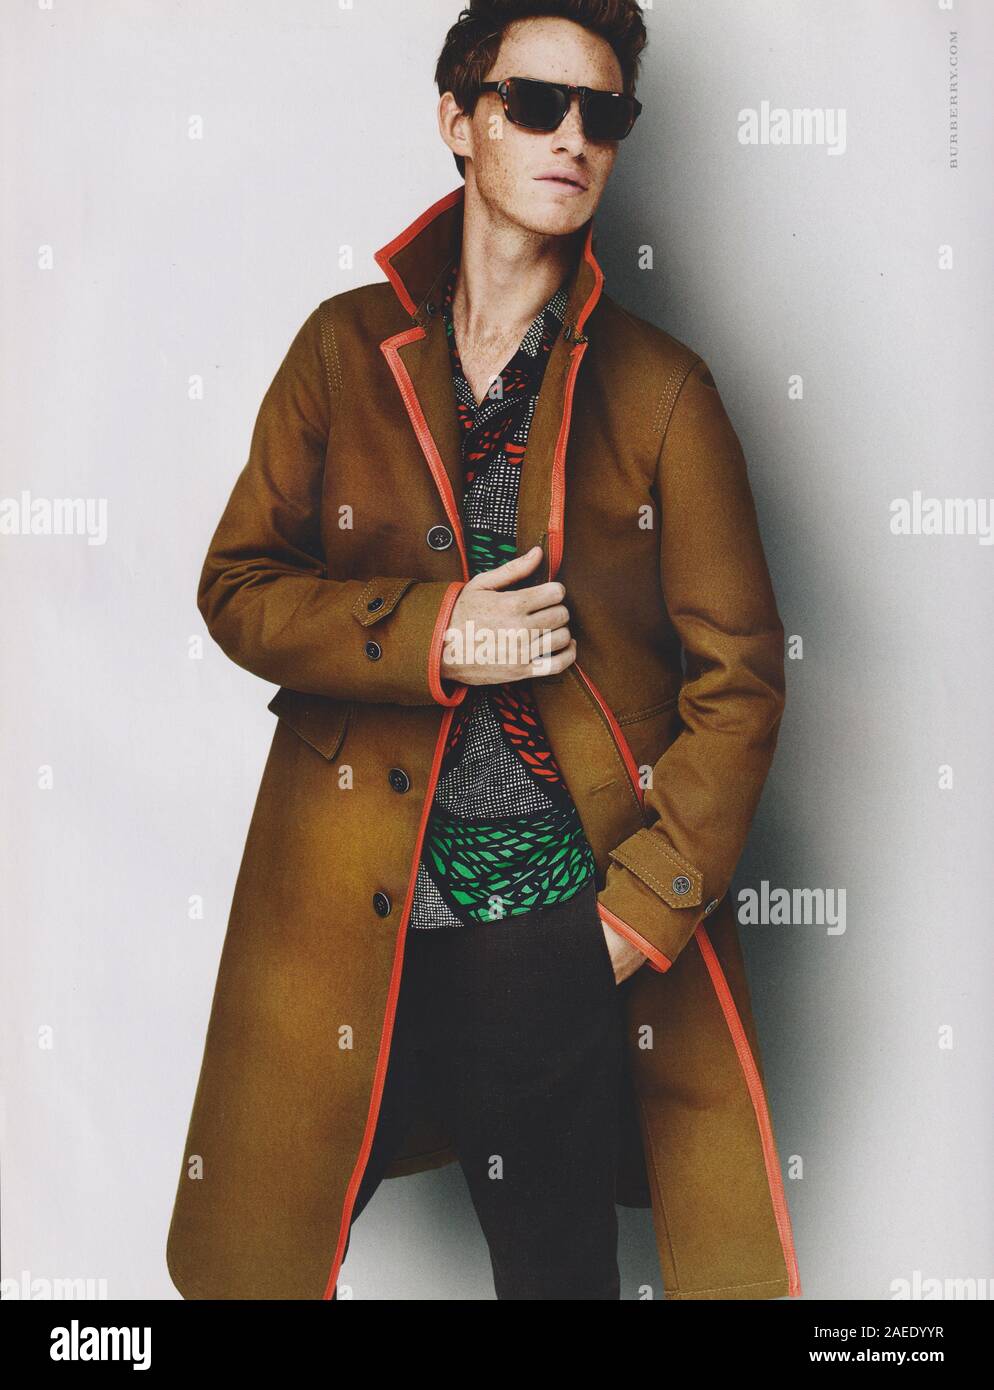 ler Ved daggry Knoglemarv poster advertising Burberry fashion house with Eddie Redmayne in paper  magazine from 2012 year, advertisement, creative Burberry advert from 2010s  Stock Photo - Alamy